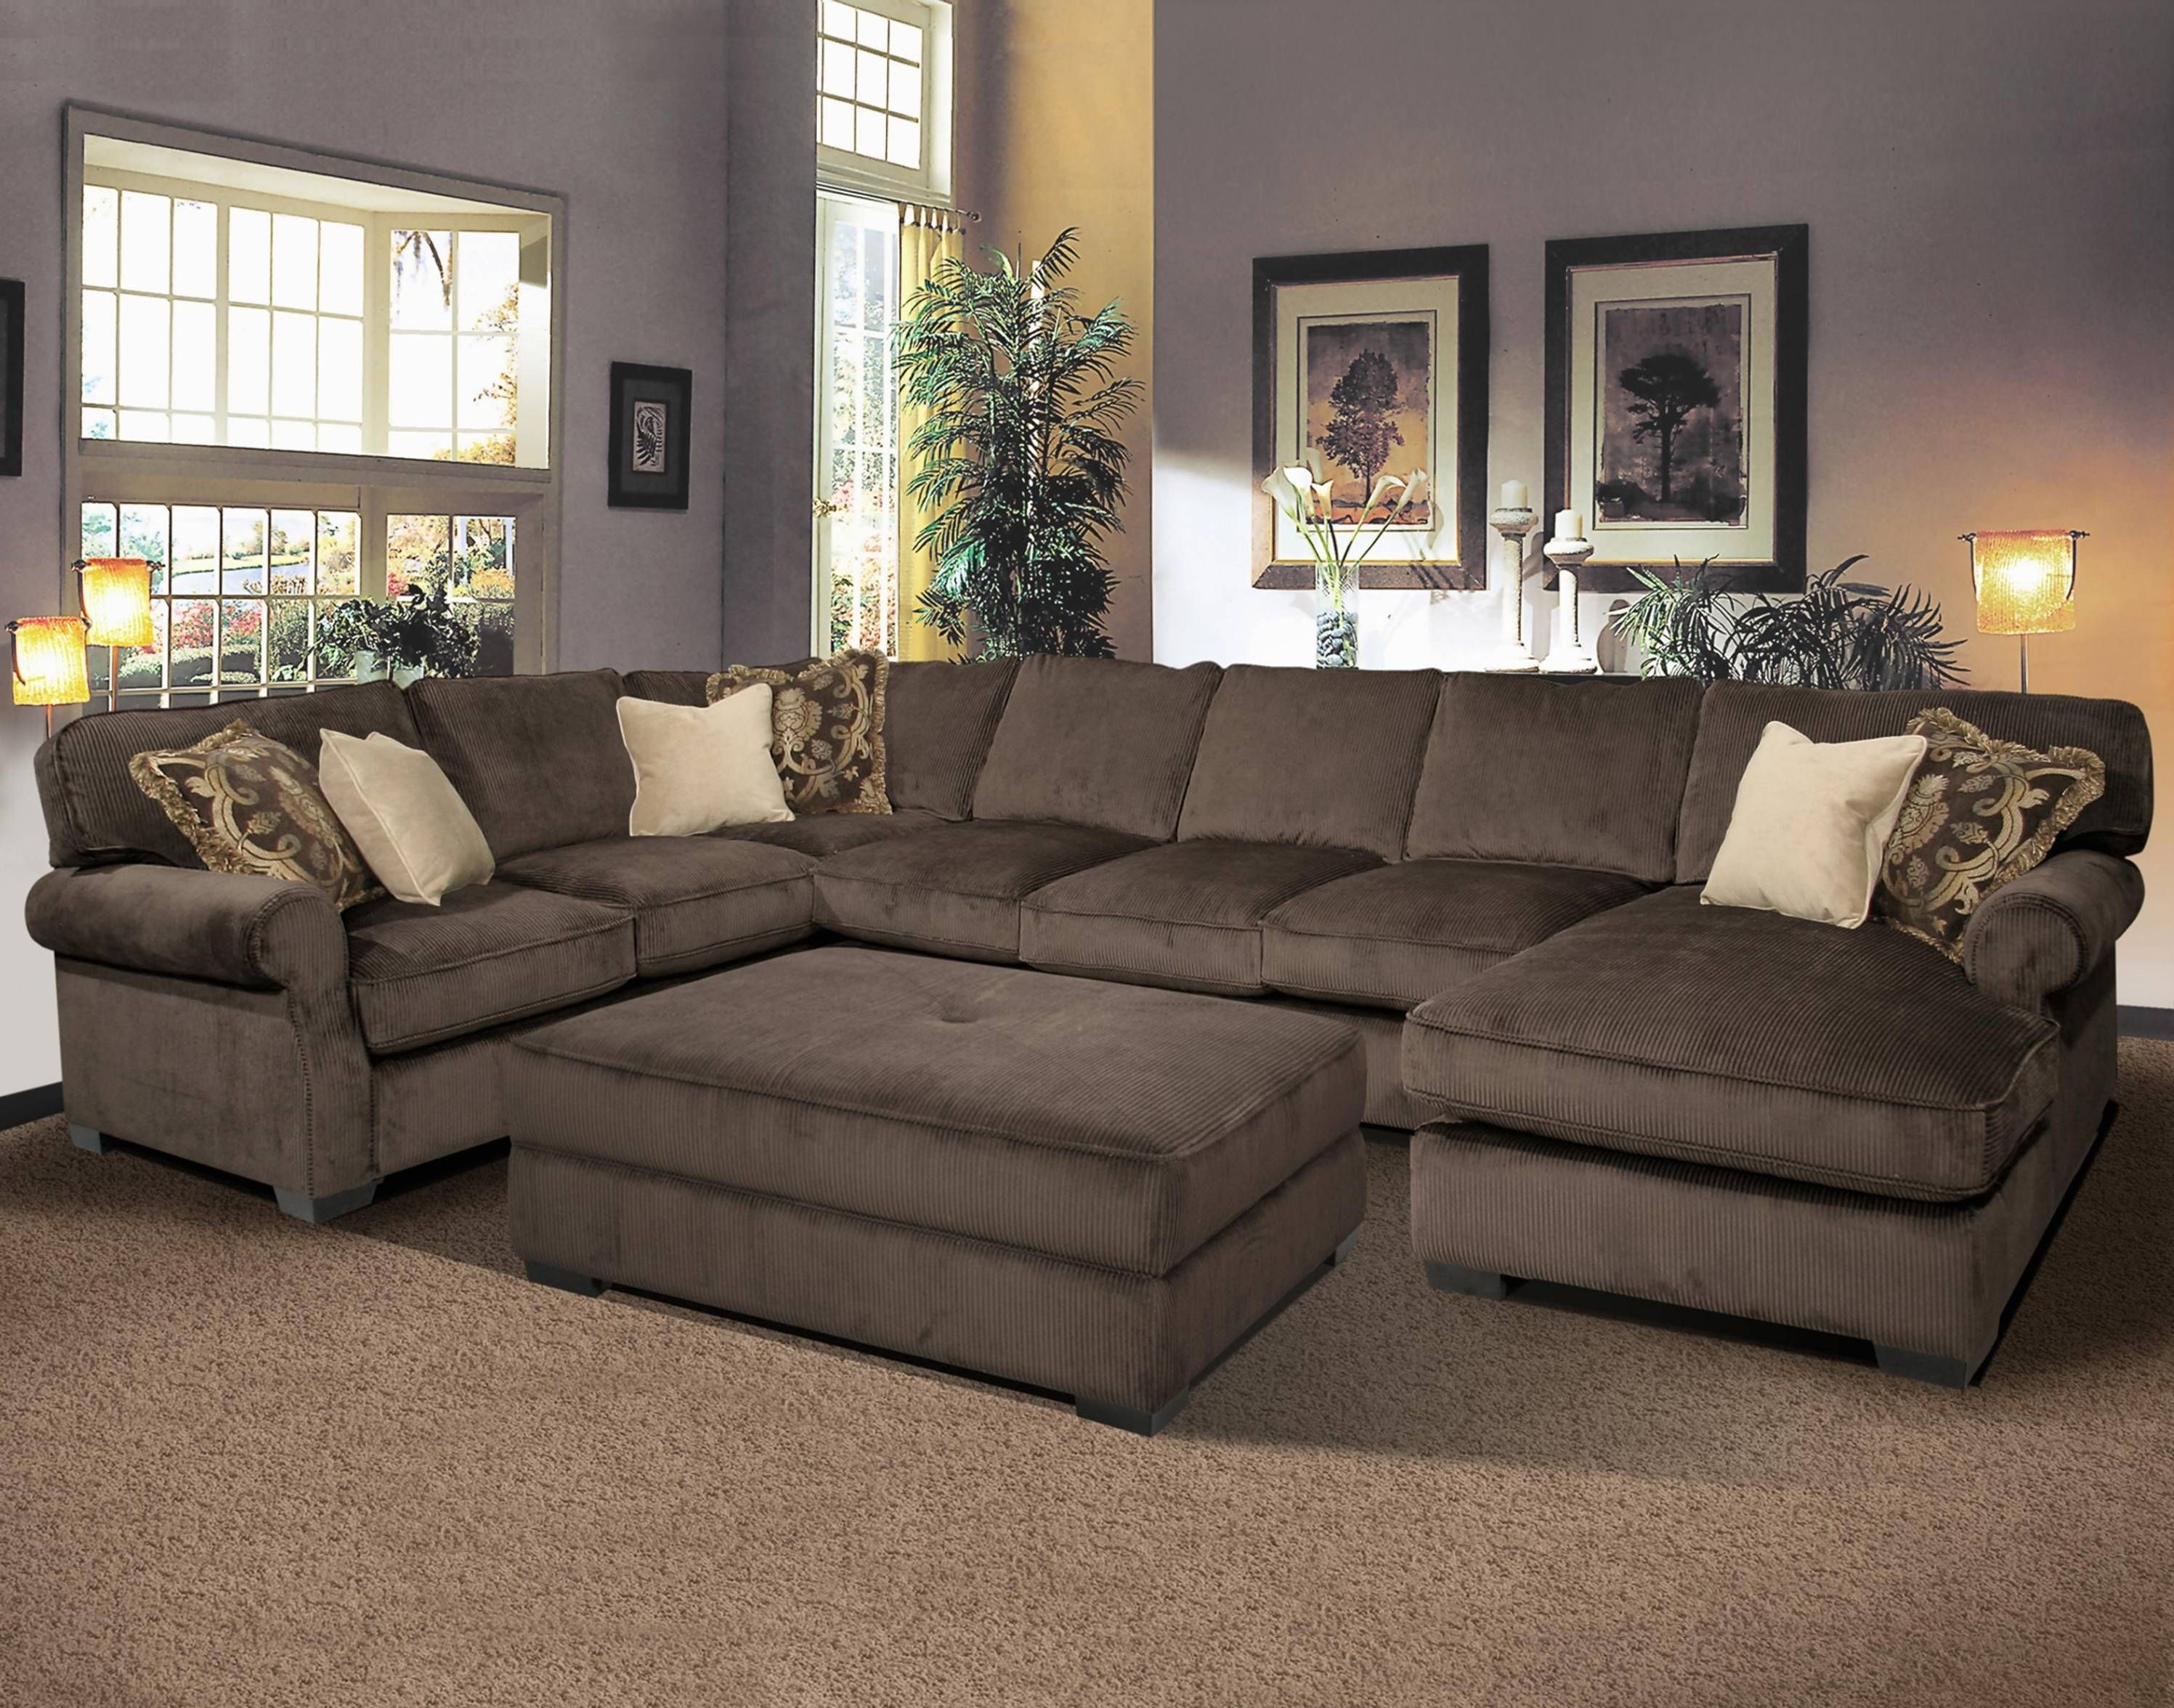 Amusing Long Sectional Sofas 34 On Sleeper Sofas And Chairs With Intended For Long Sectional Sofa With Chaise 